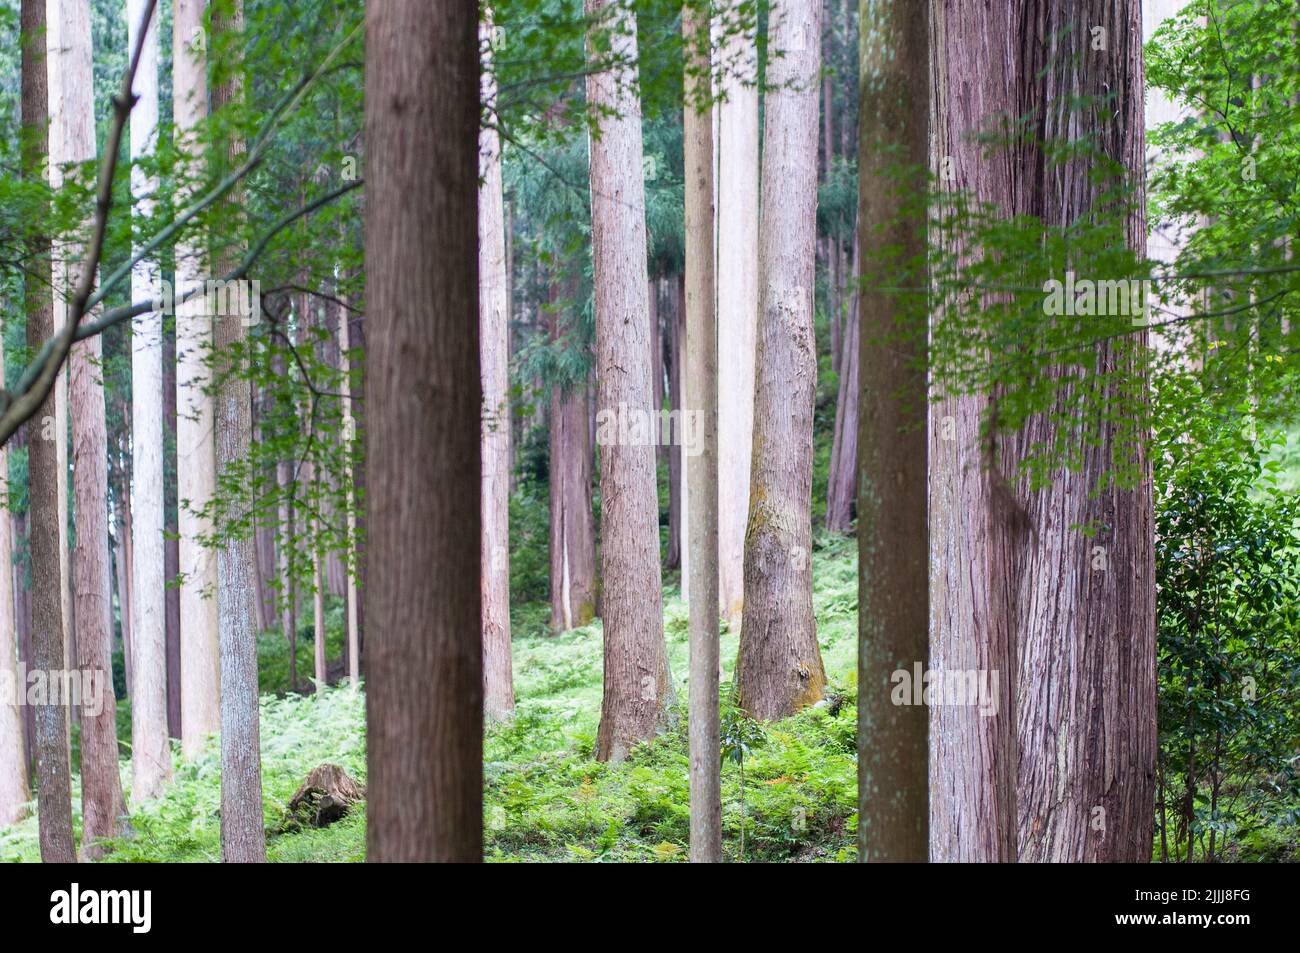 Japanese forest Stock Photo